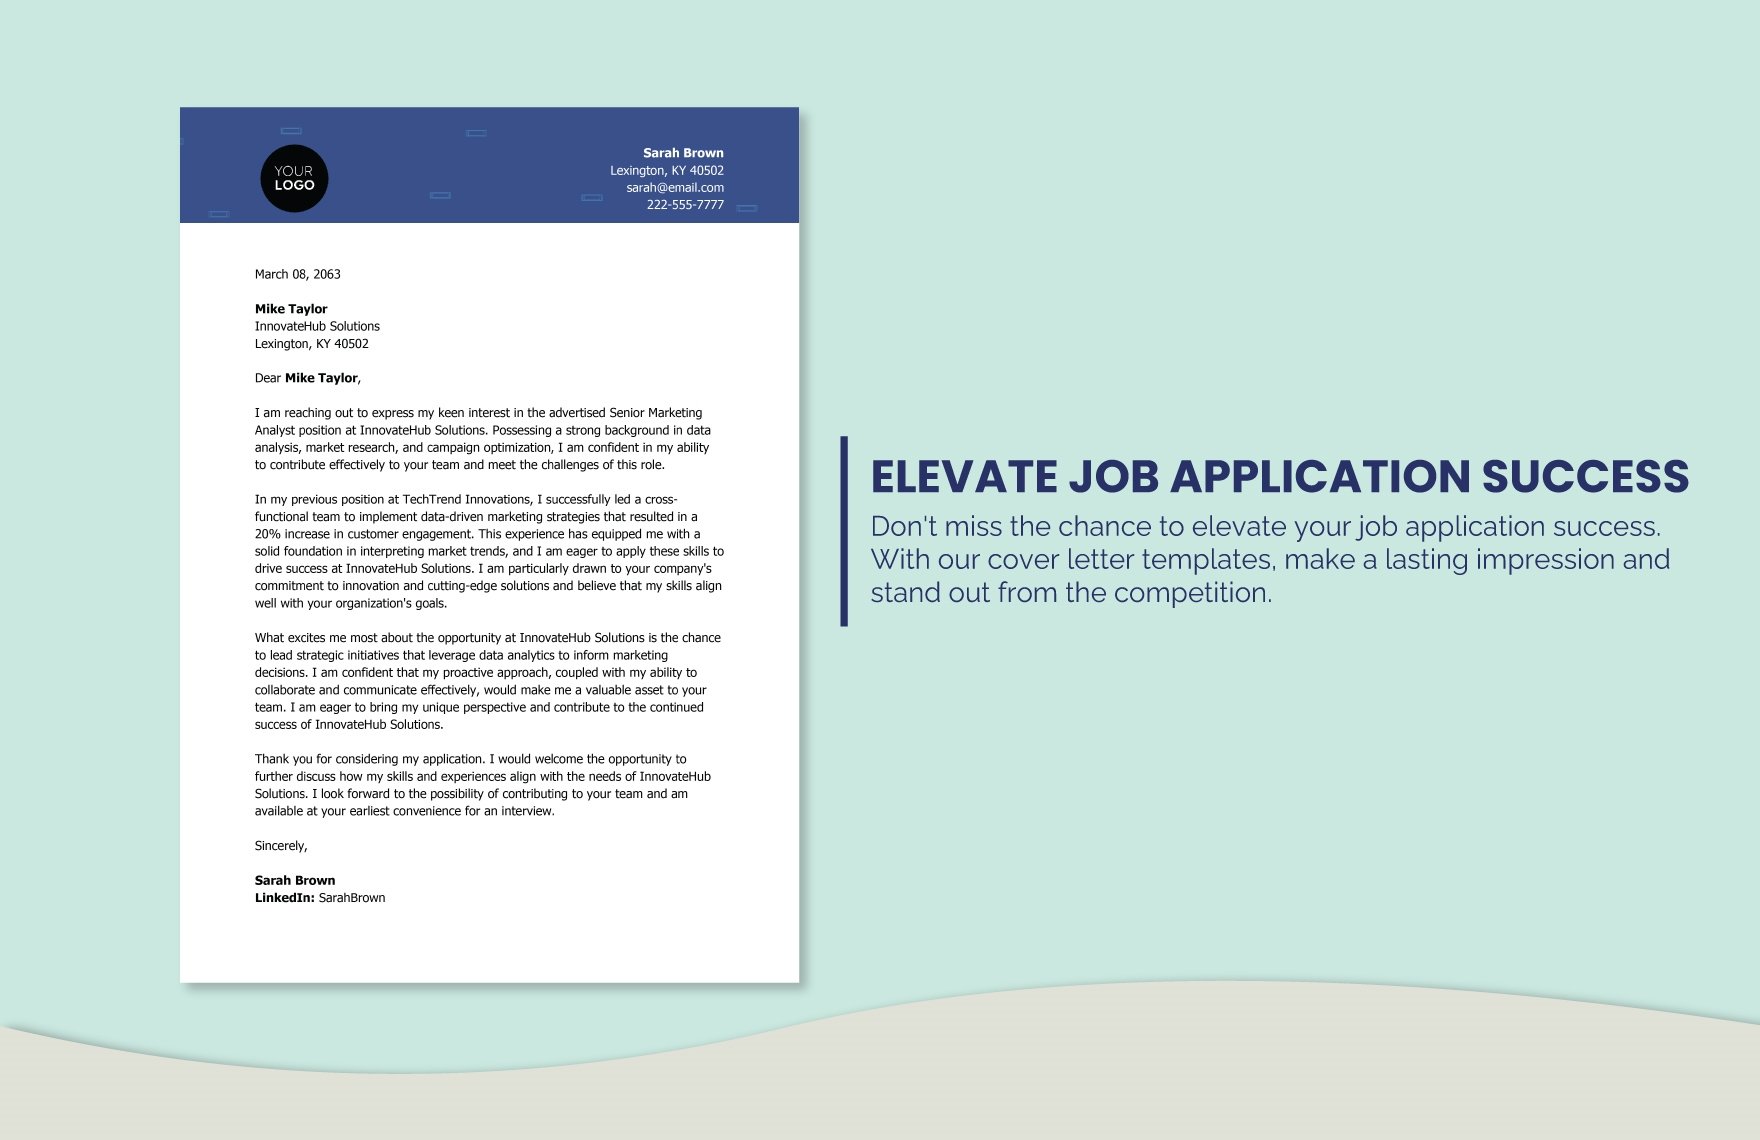 Job Application Cover Letter Template